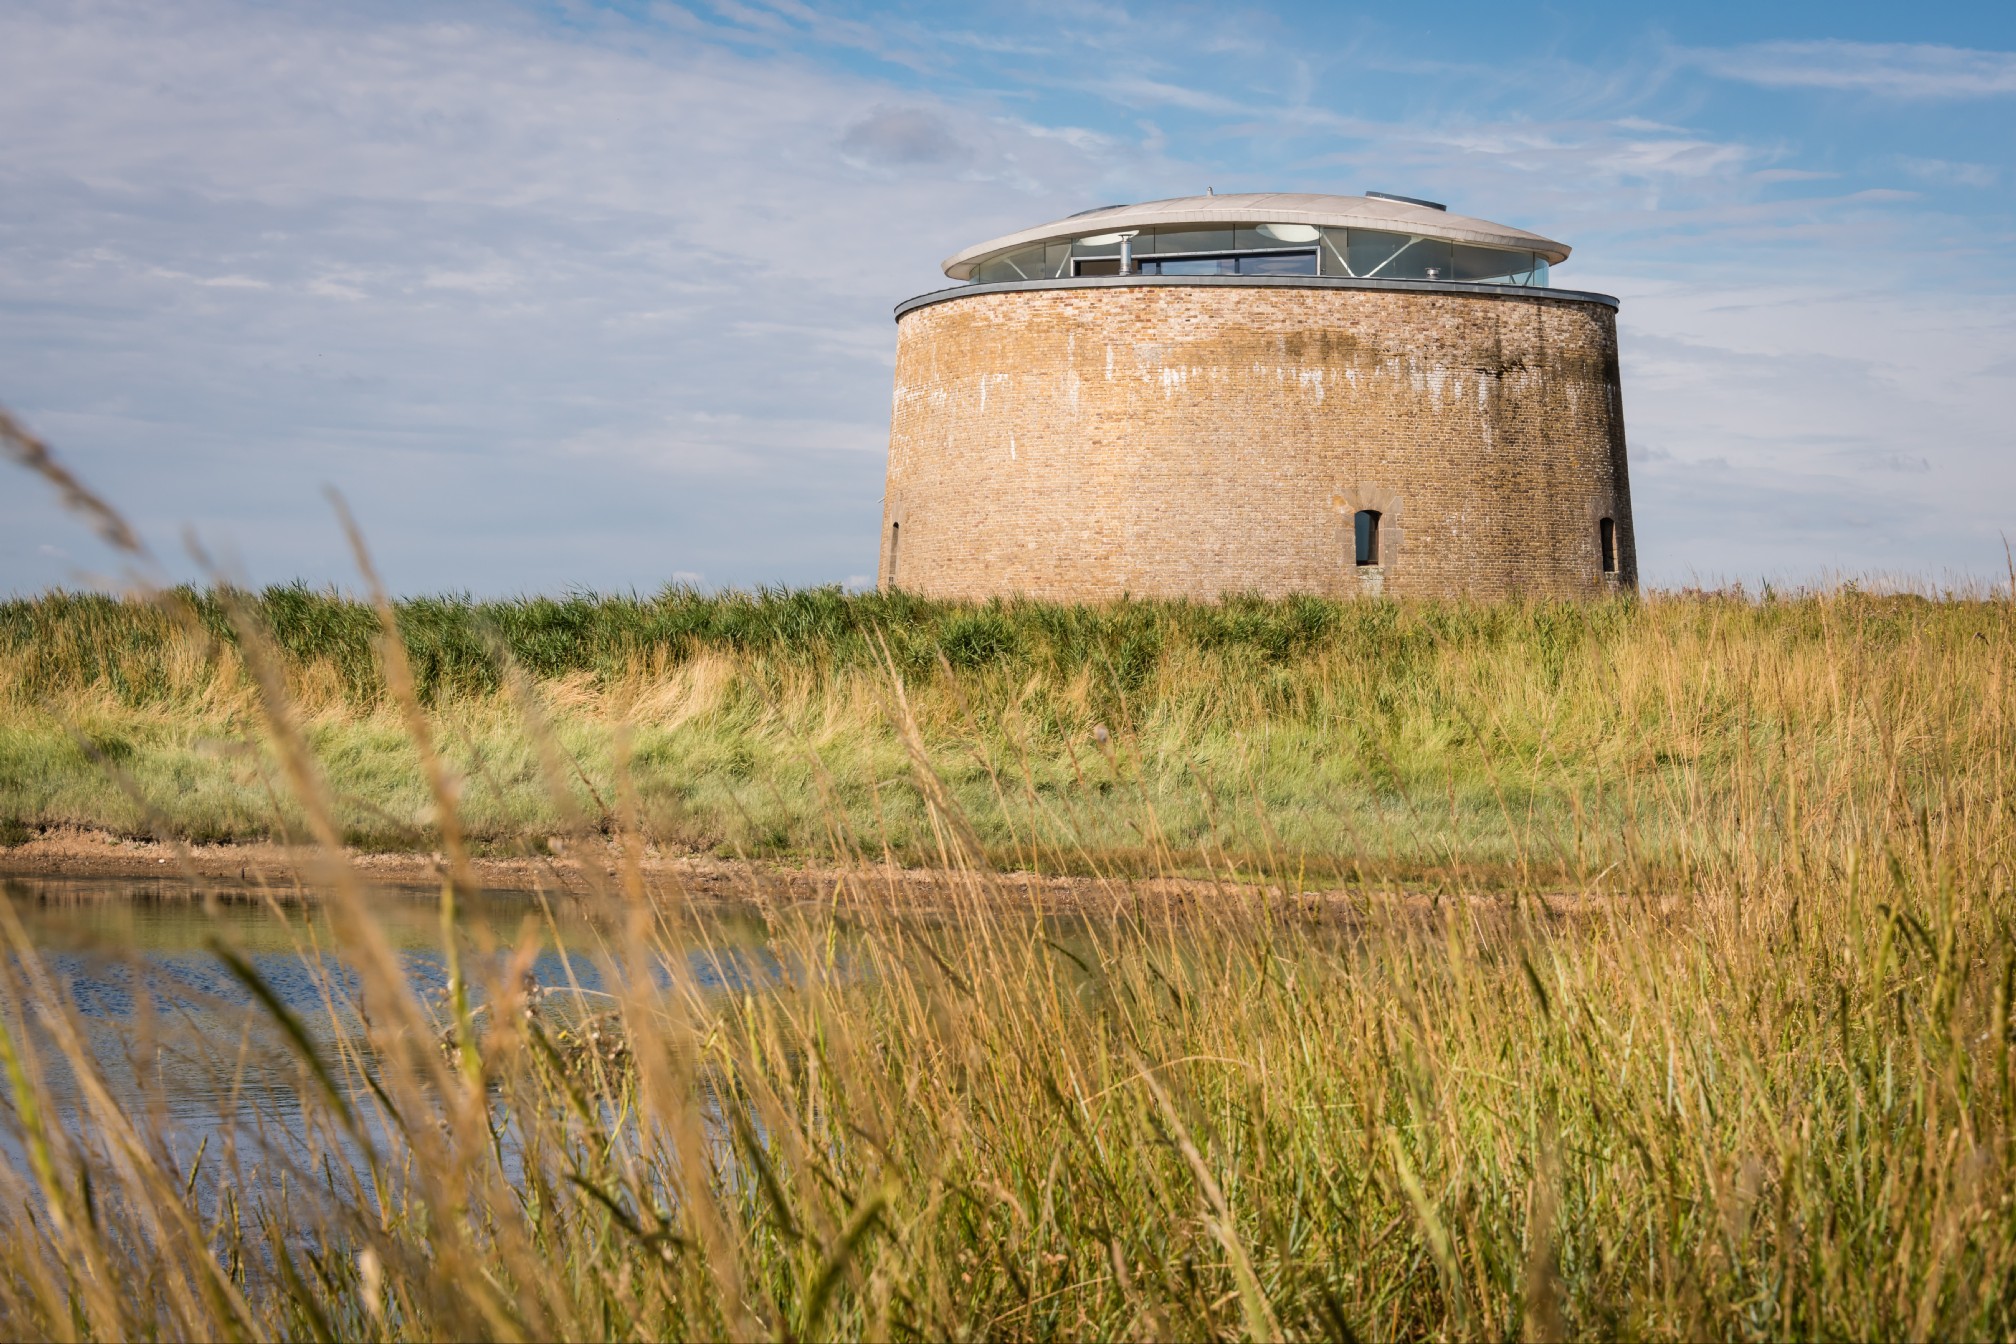 The Found Luxury Self Catering Martello Tower Bawdsey Woodbridge